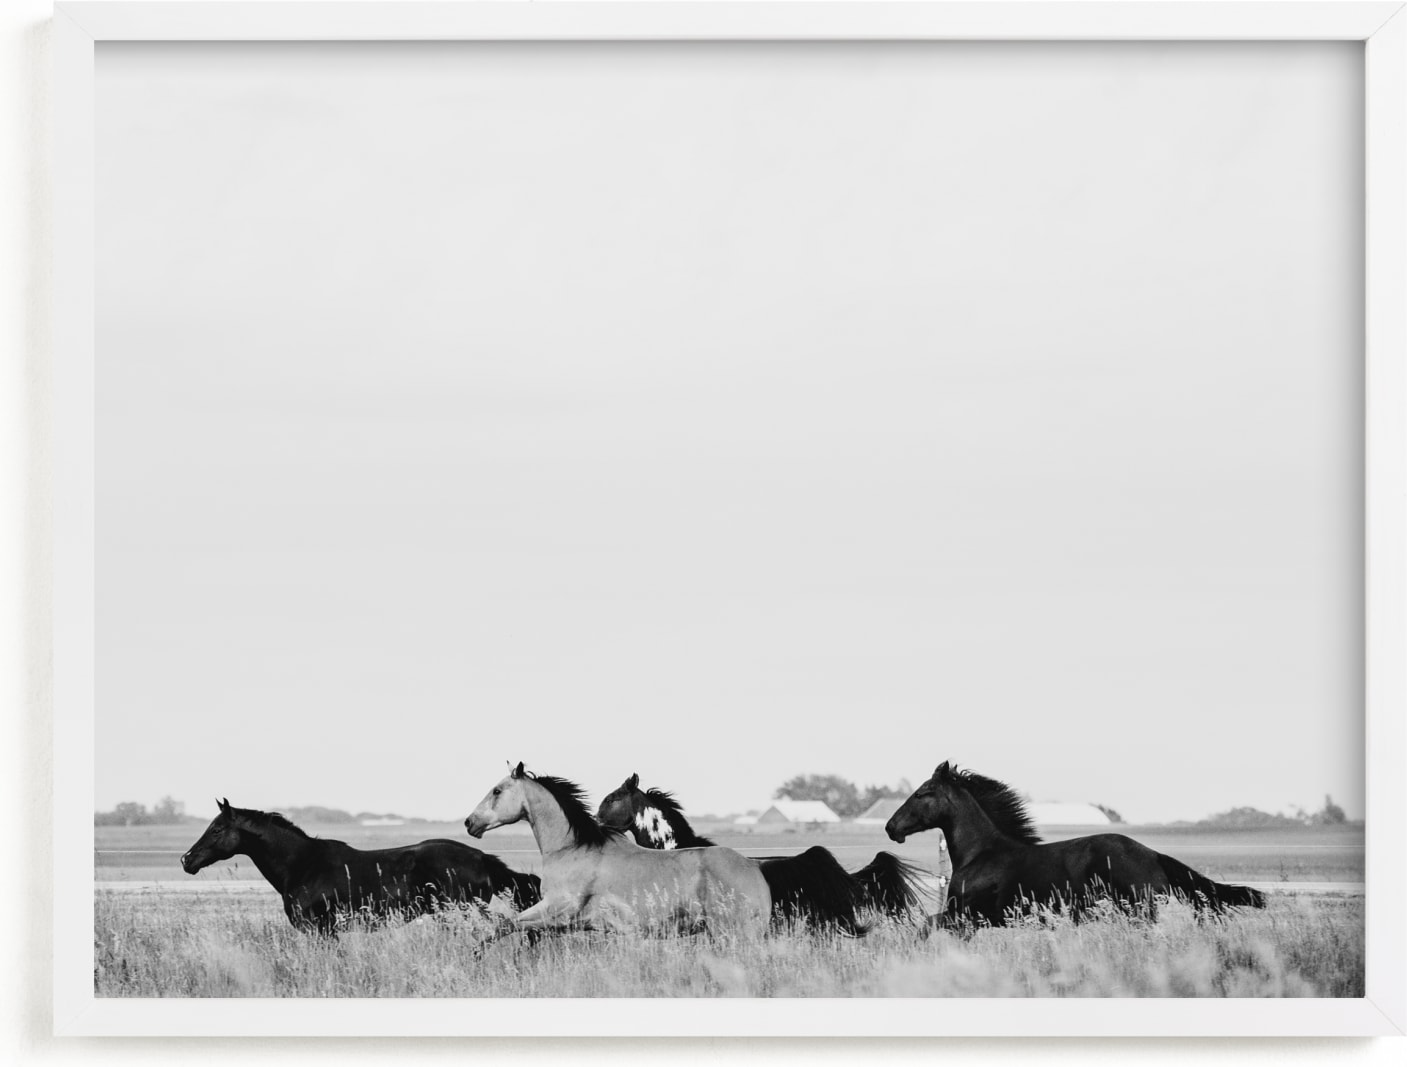 This is a black and white art by Amy Carroll called That Wild Dream.